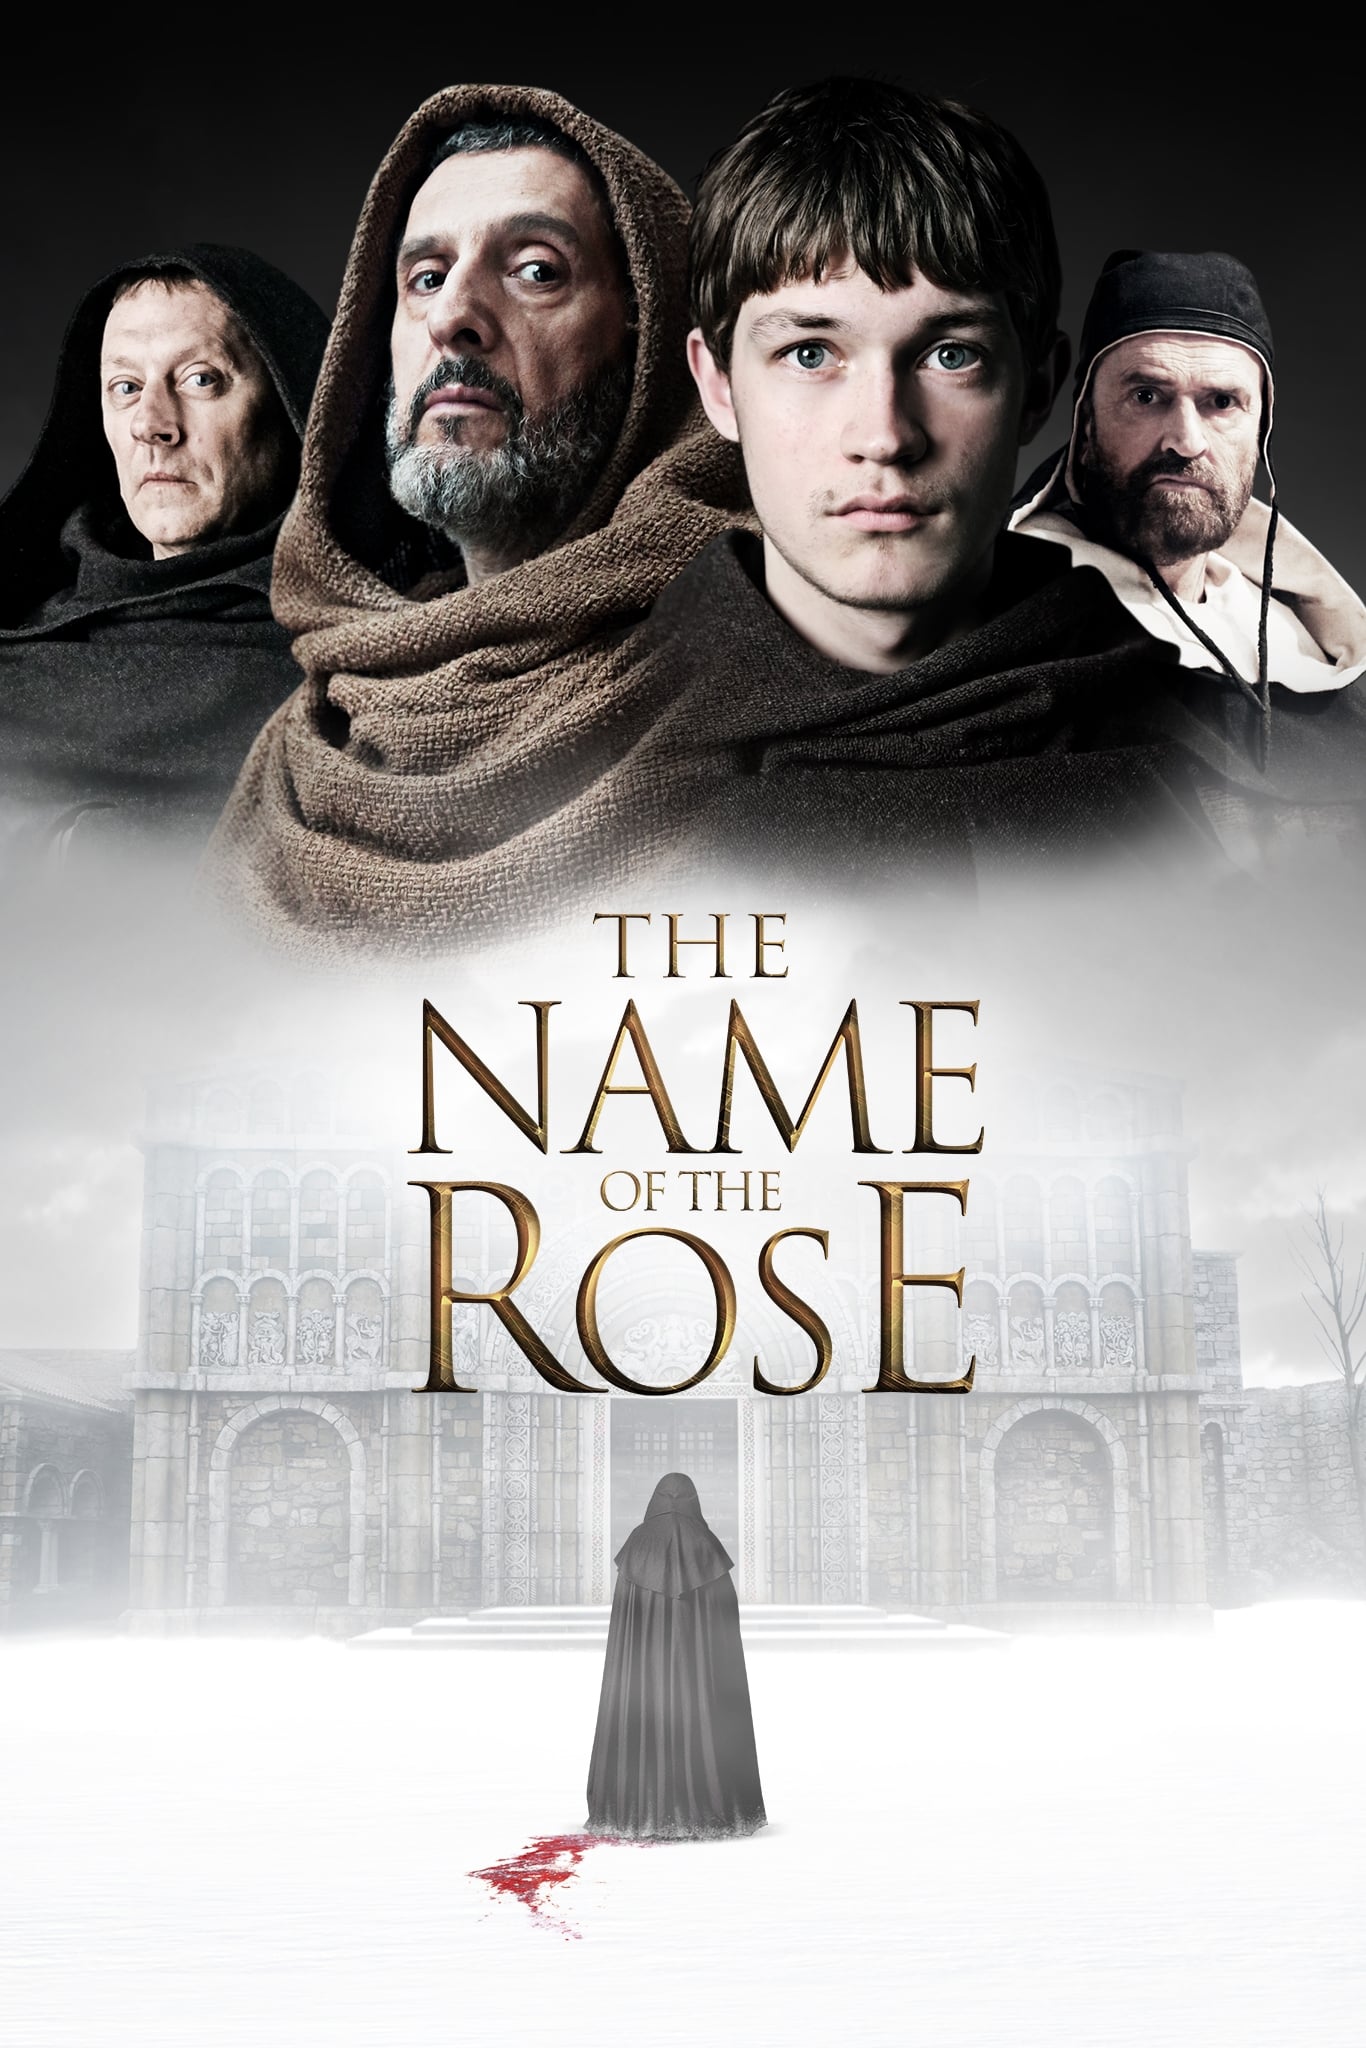 The Name of the Rose (2019)